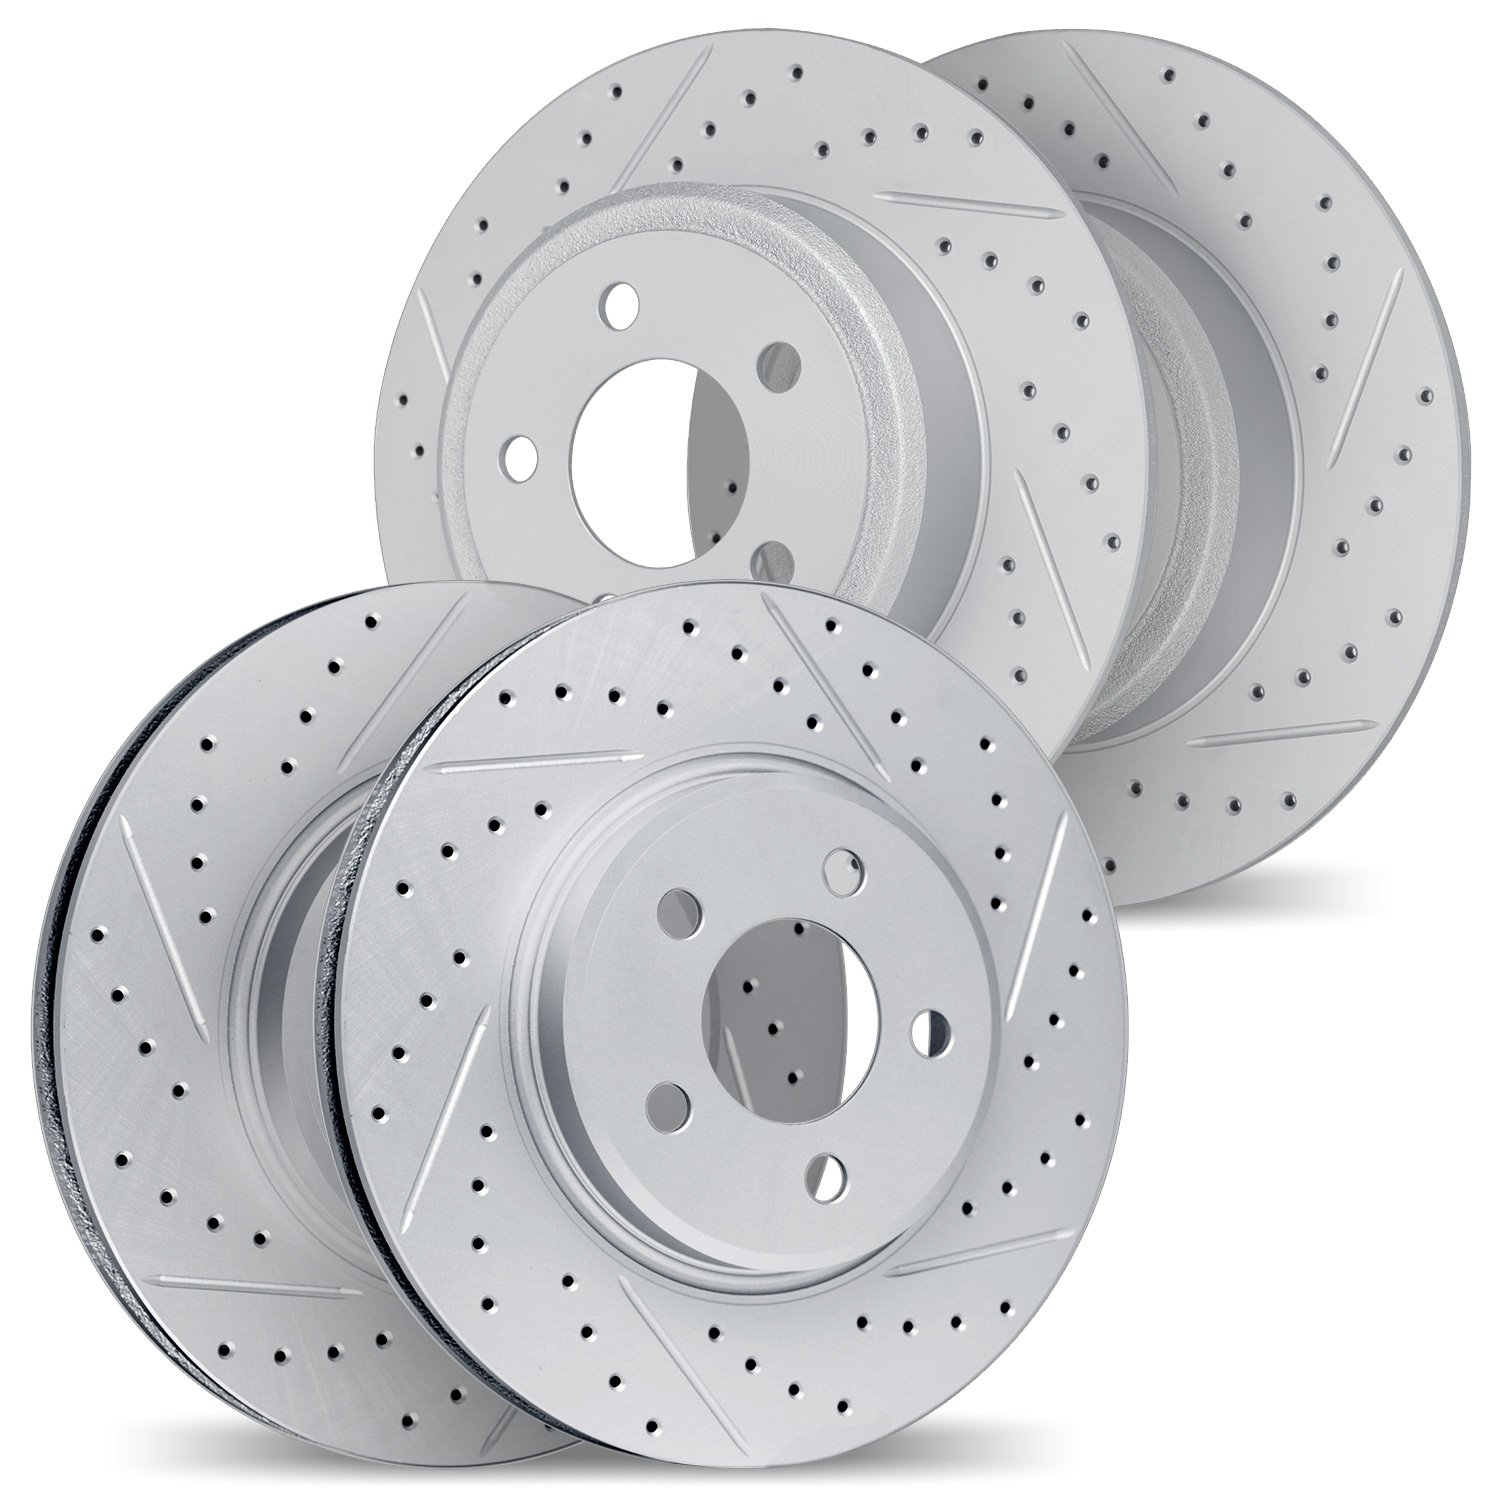 2004-73020 Geoperformance Drilled/Slotted Brake Rotors, 1999-2004 Audi/Volkswagen, Position: Front and Rear